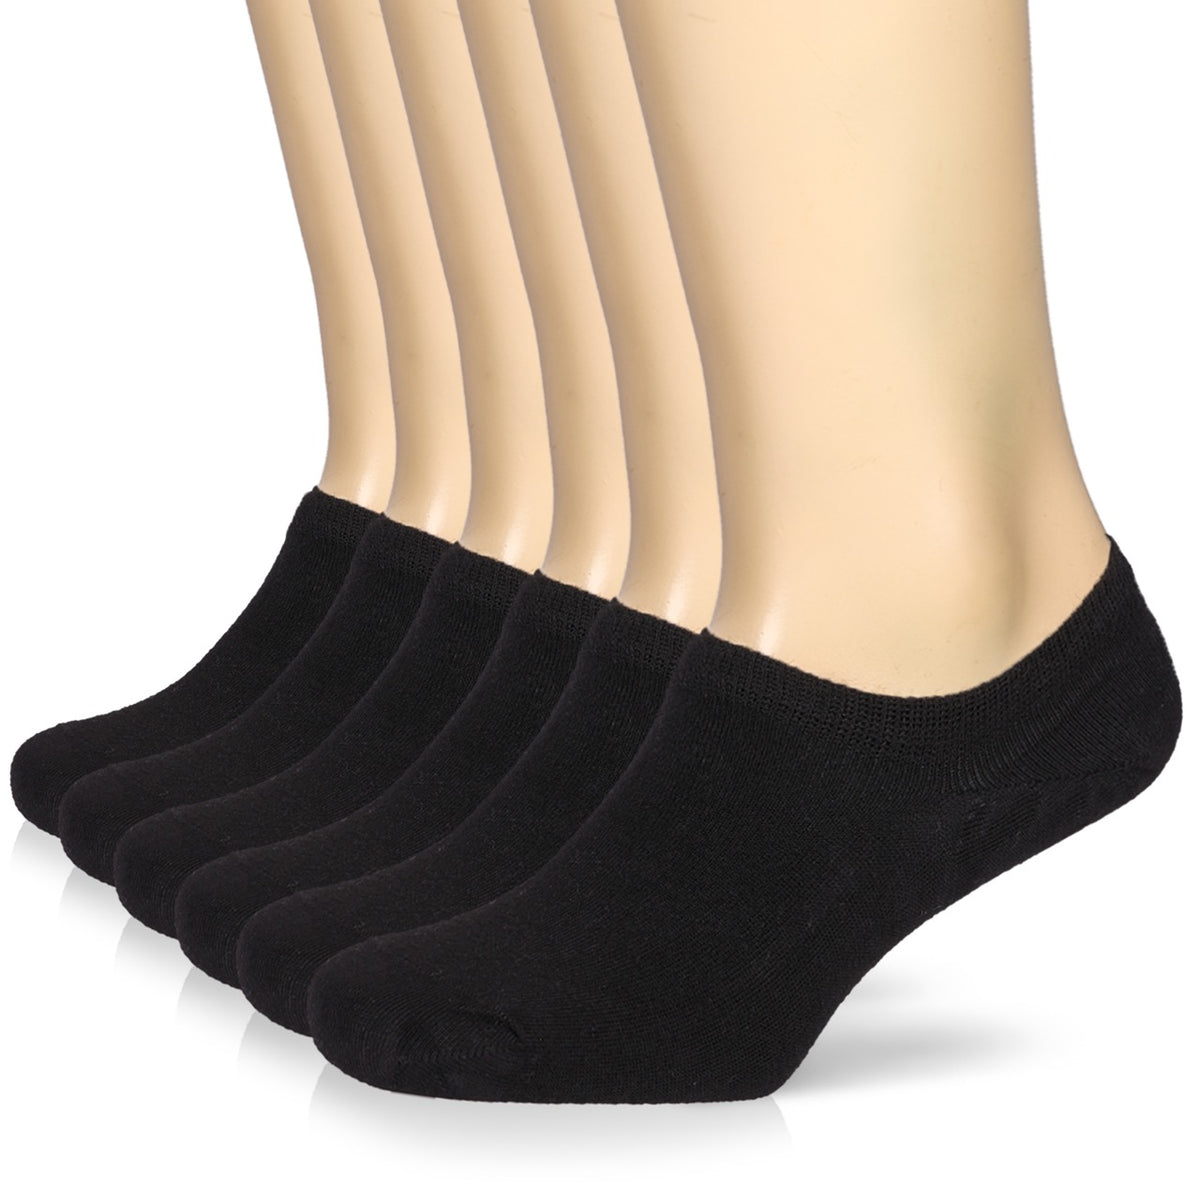 A mannequin displays three pairs of Men's Bamboo No-Show Socks in black, perfect for a comfortable and stylish look.